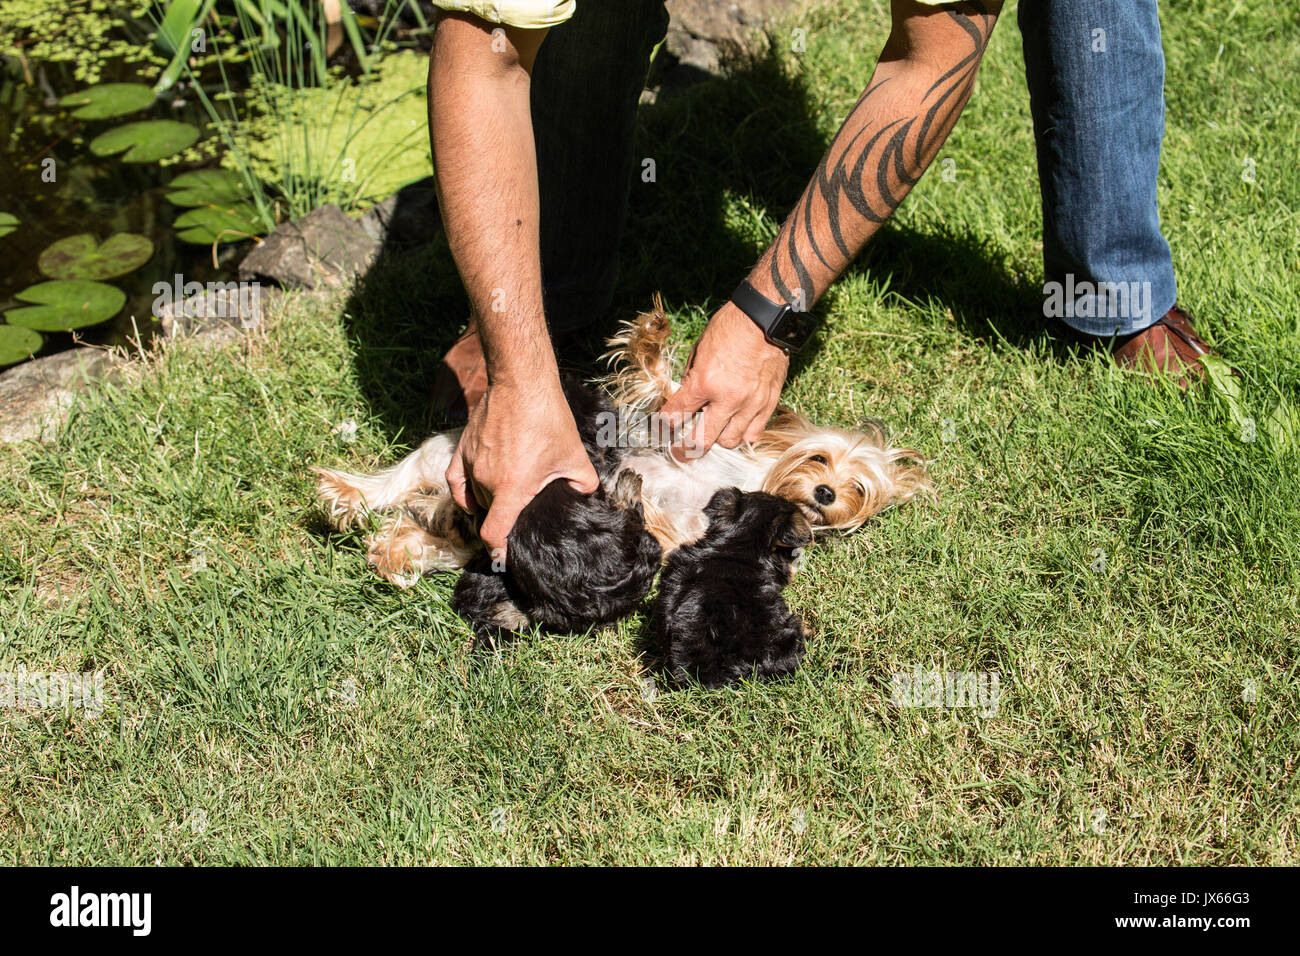 Man helping his three Teacup Yorkshire Terrier puppies to nurse from their mom outside in Issaquah, Washington, USA Stock Photo